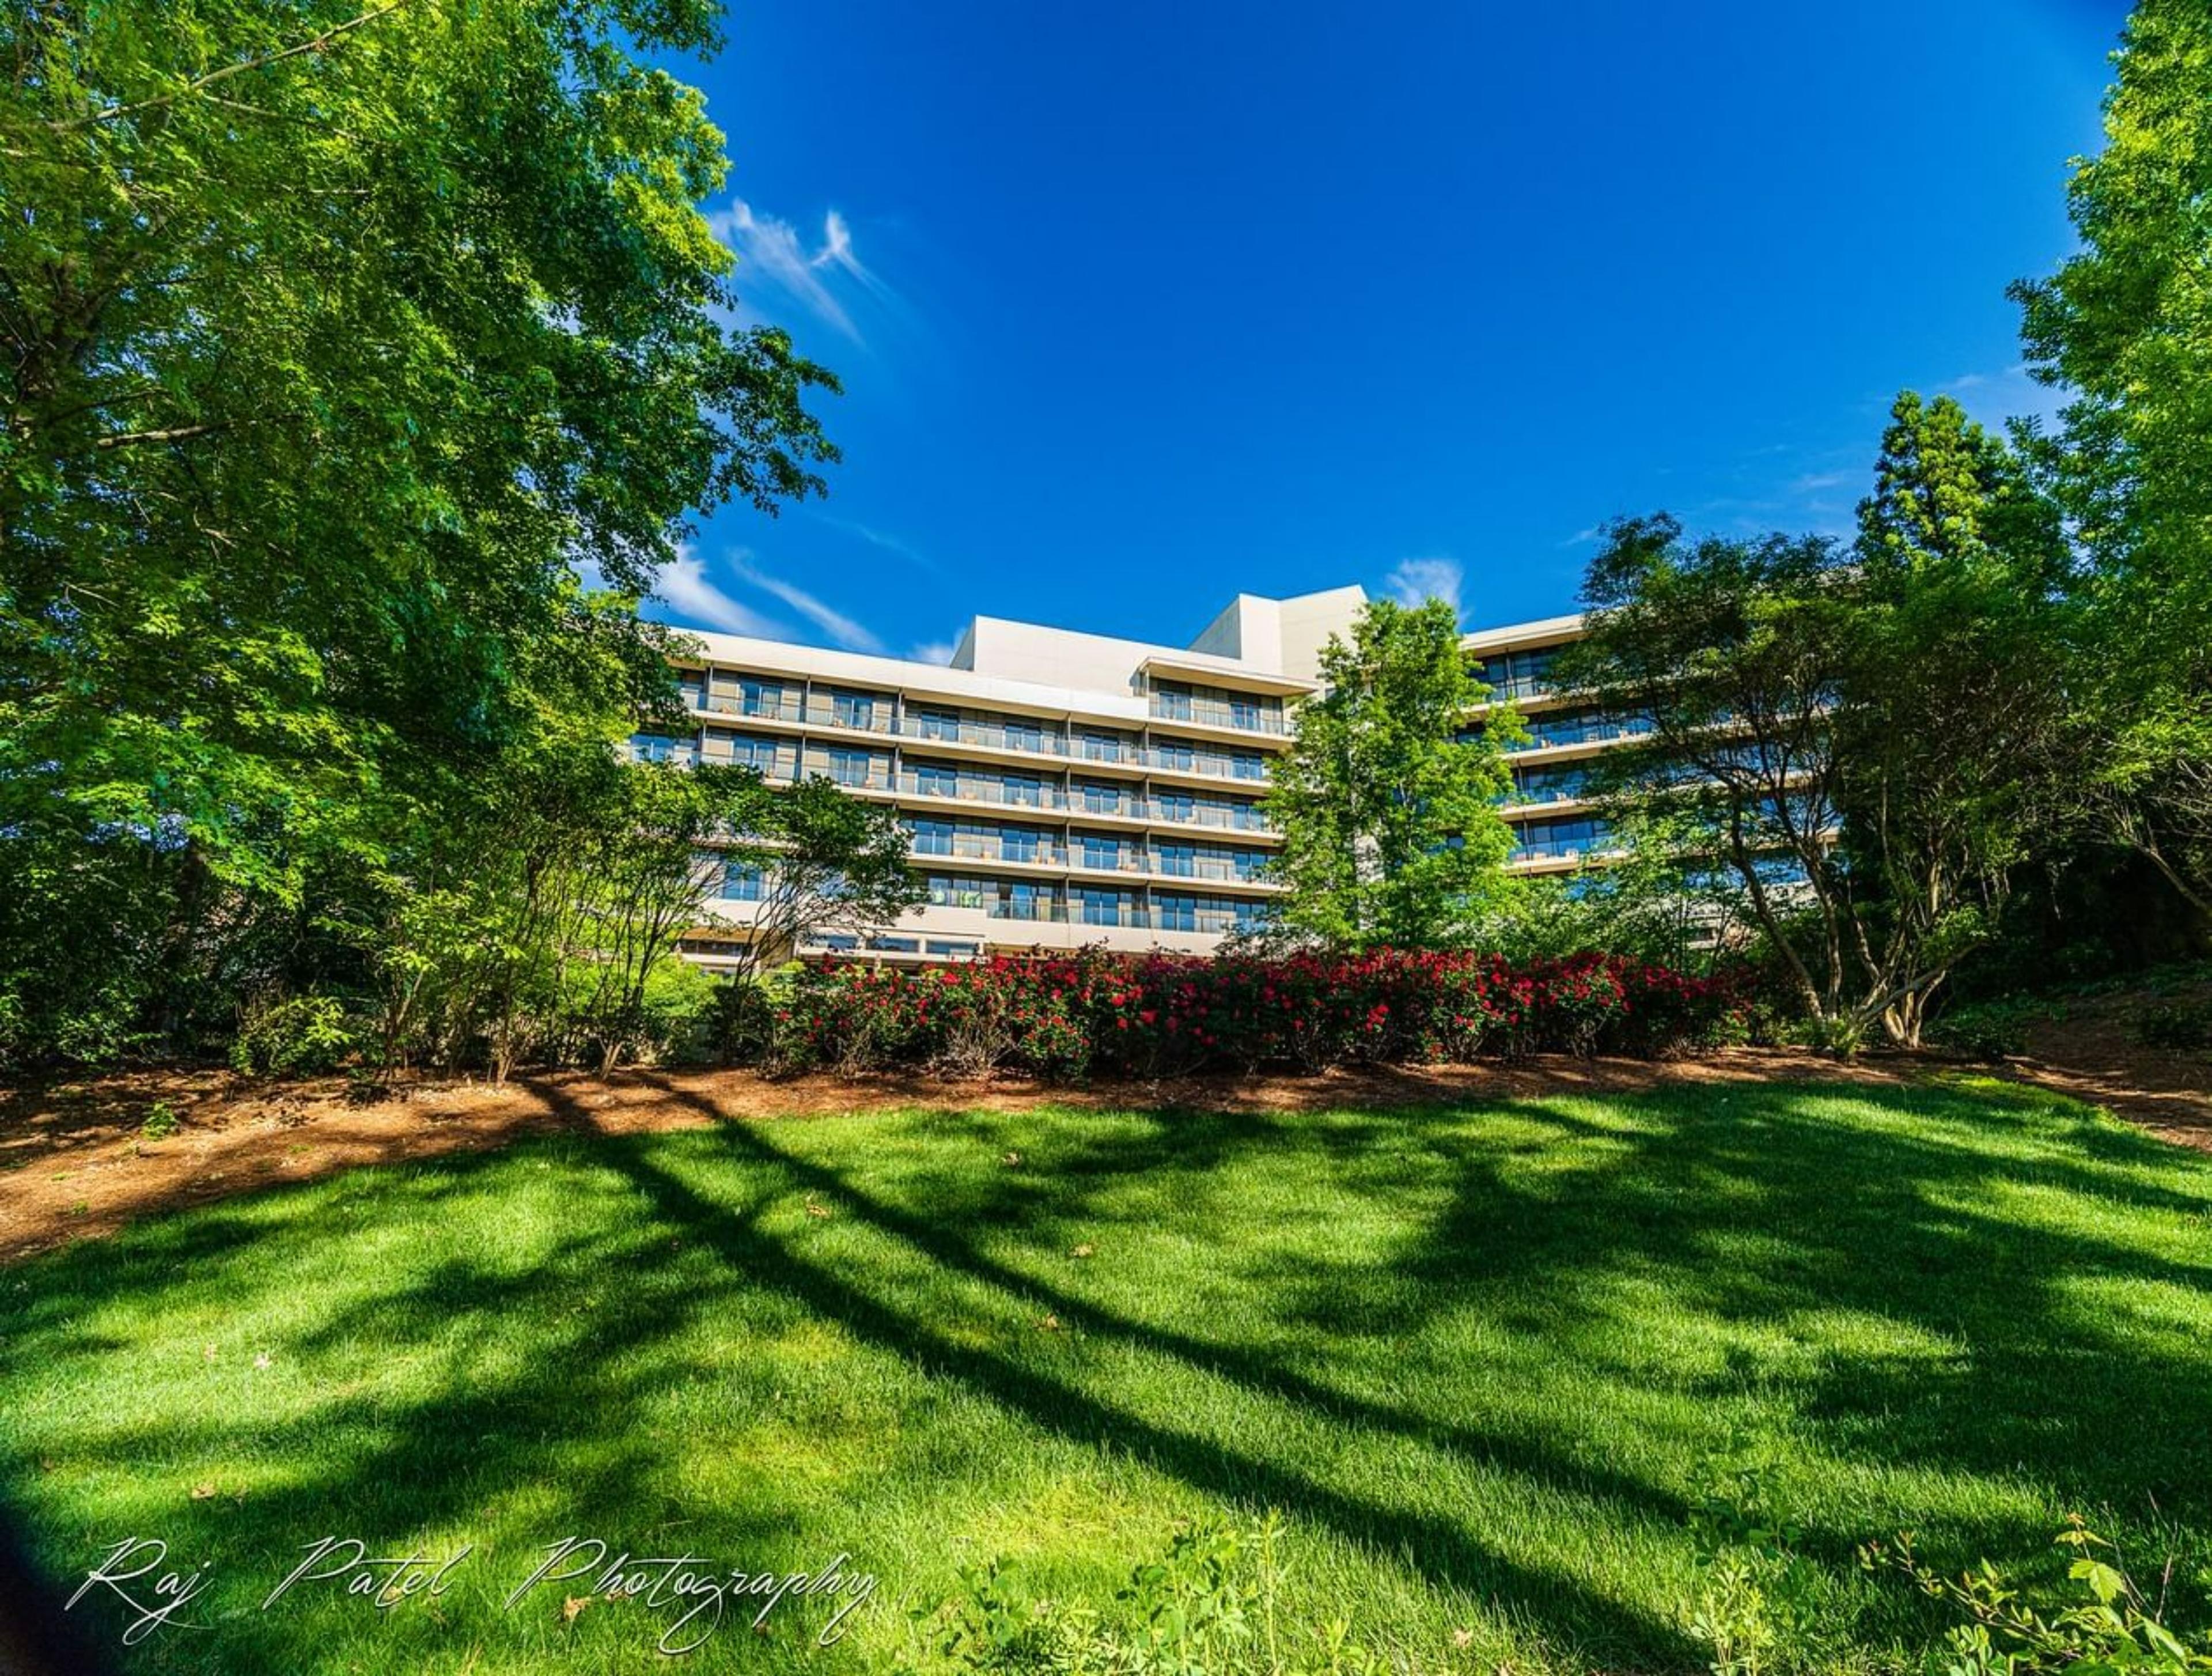 The Umstead Hotel and Spa - Cary, NC